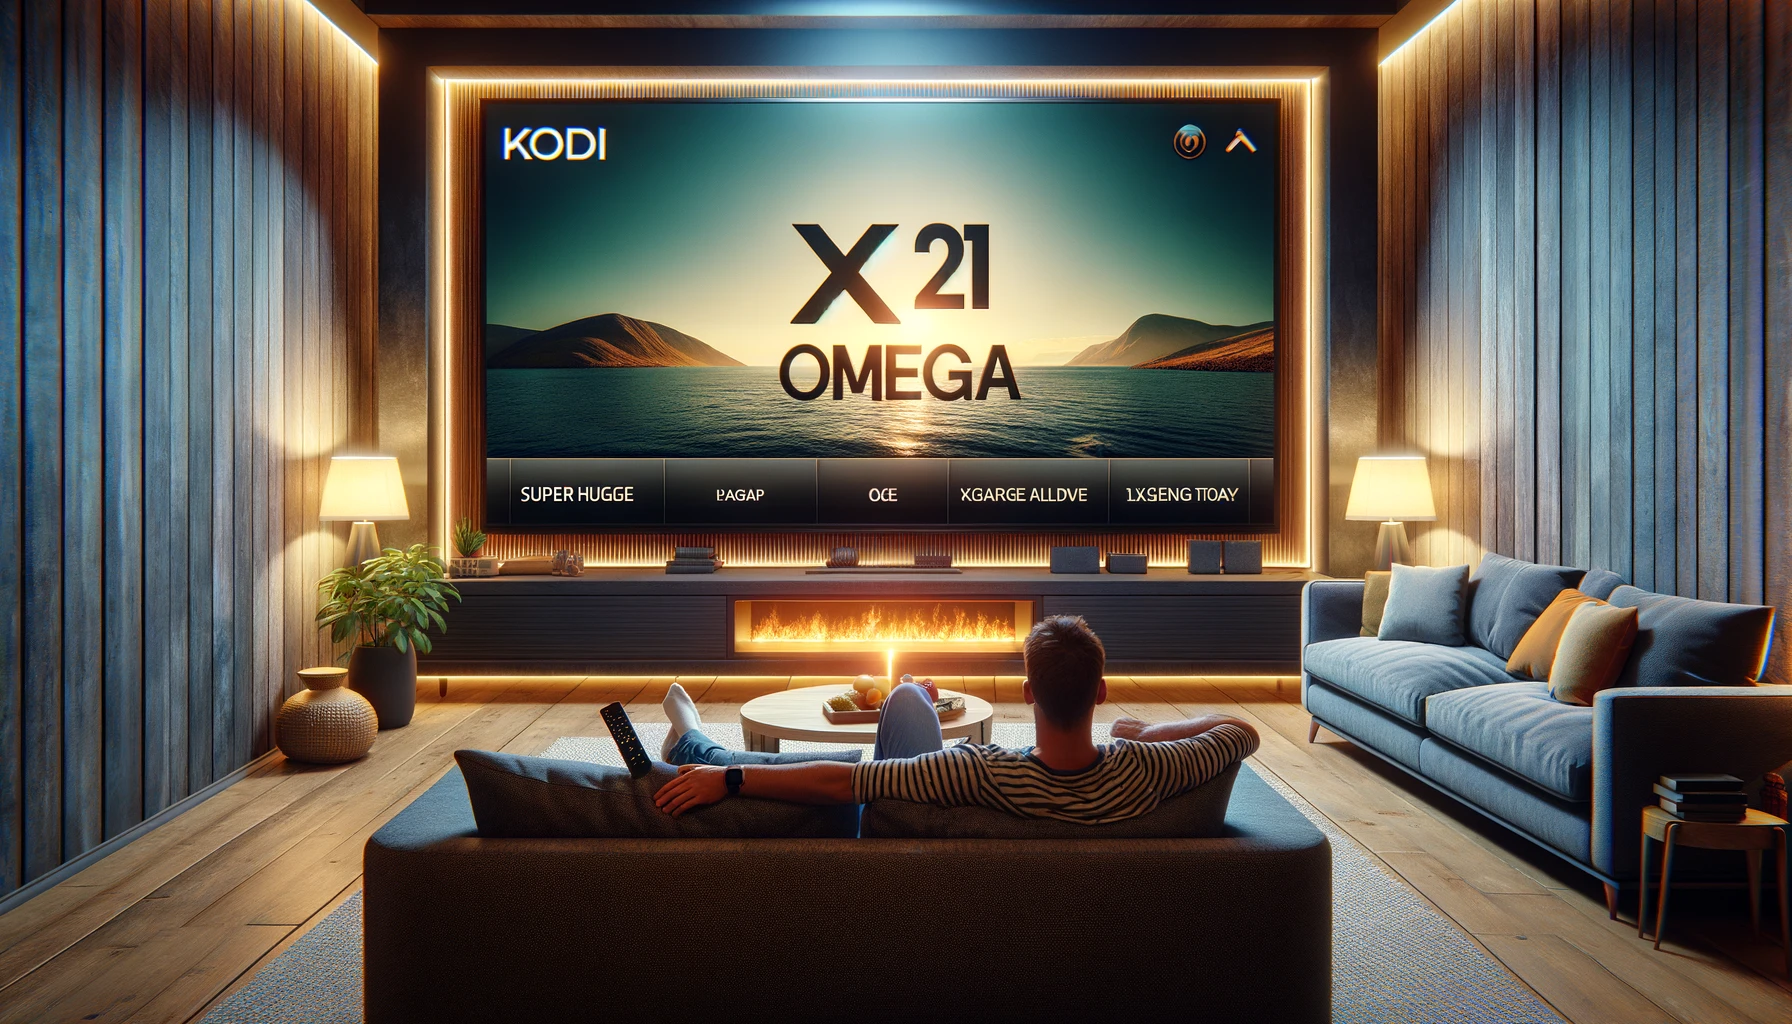 Kodi 21 Omega Officially Released – Install File Included